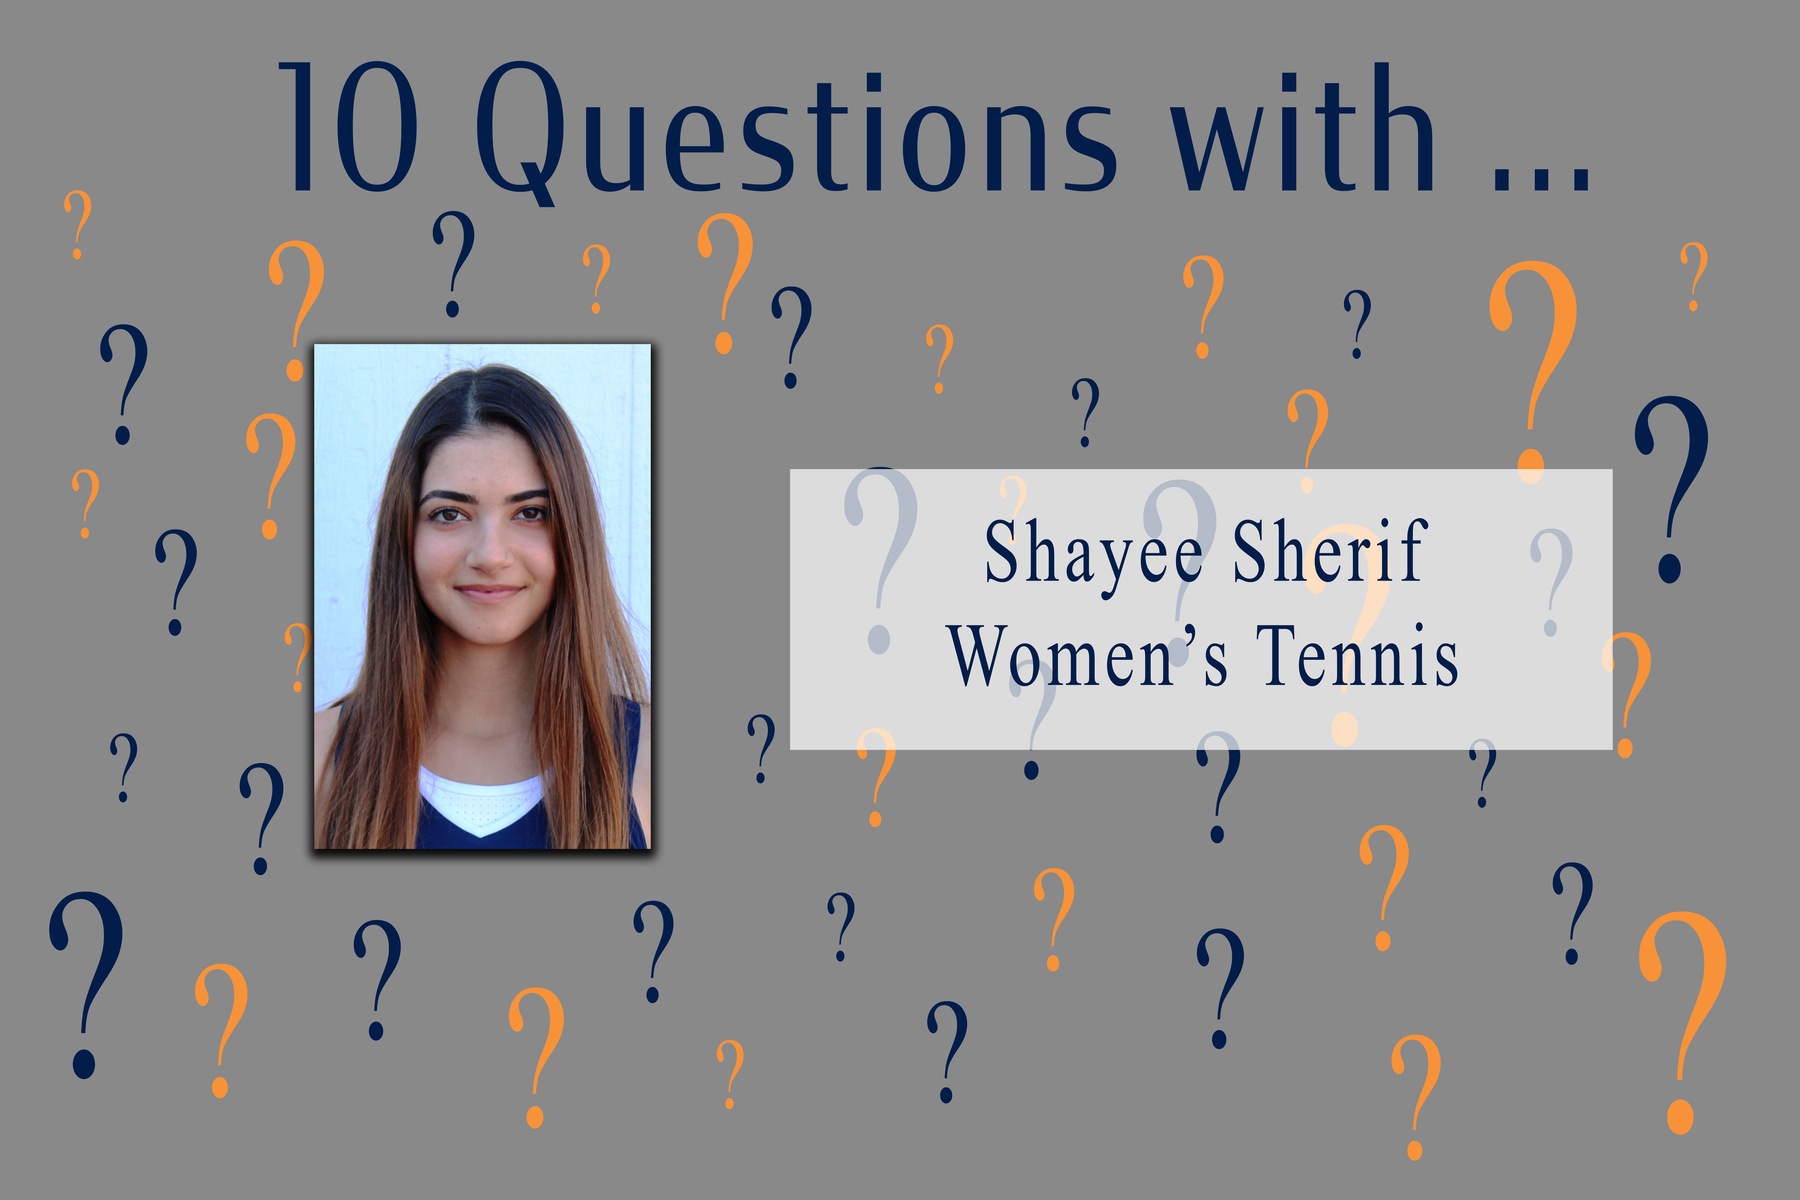 10 Questions With ... Shayee Sherif -- Women's Tennis